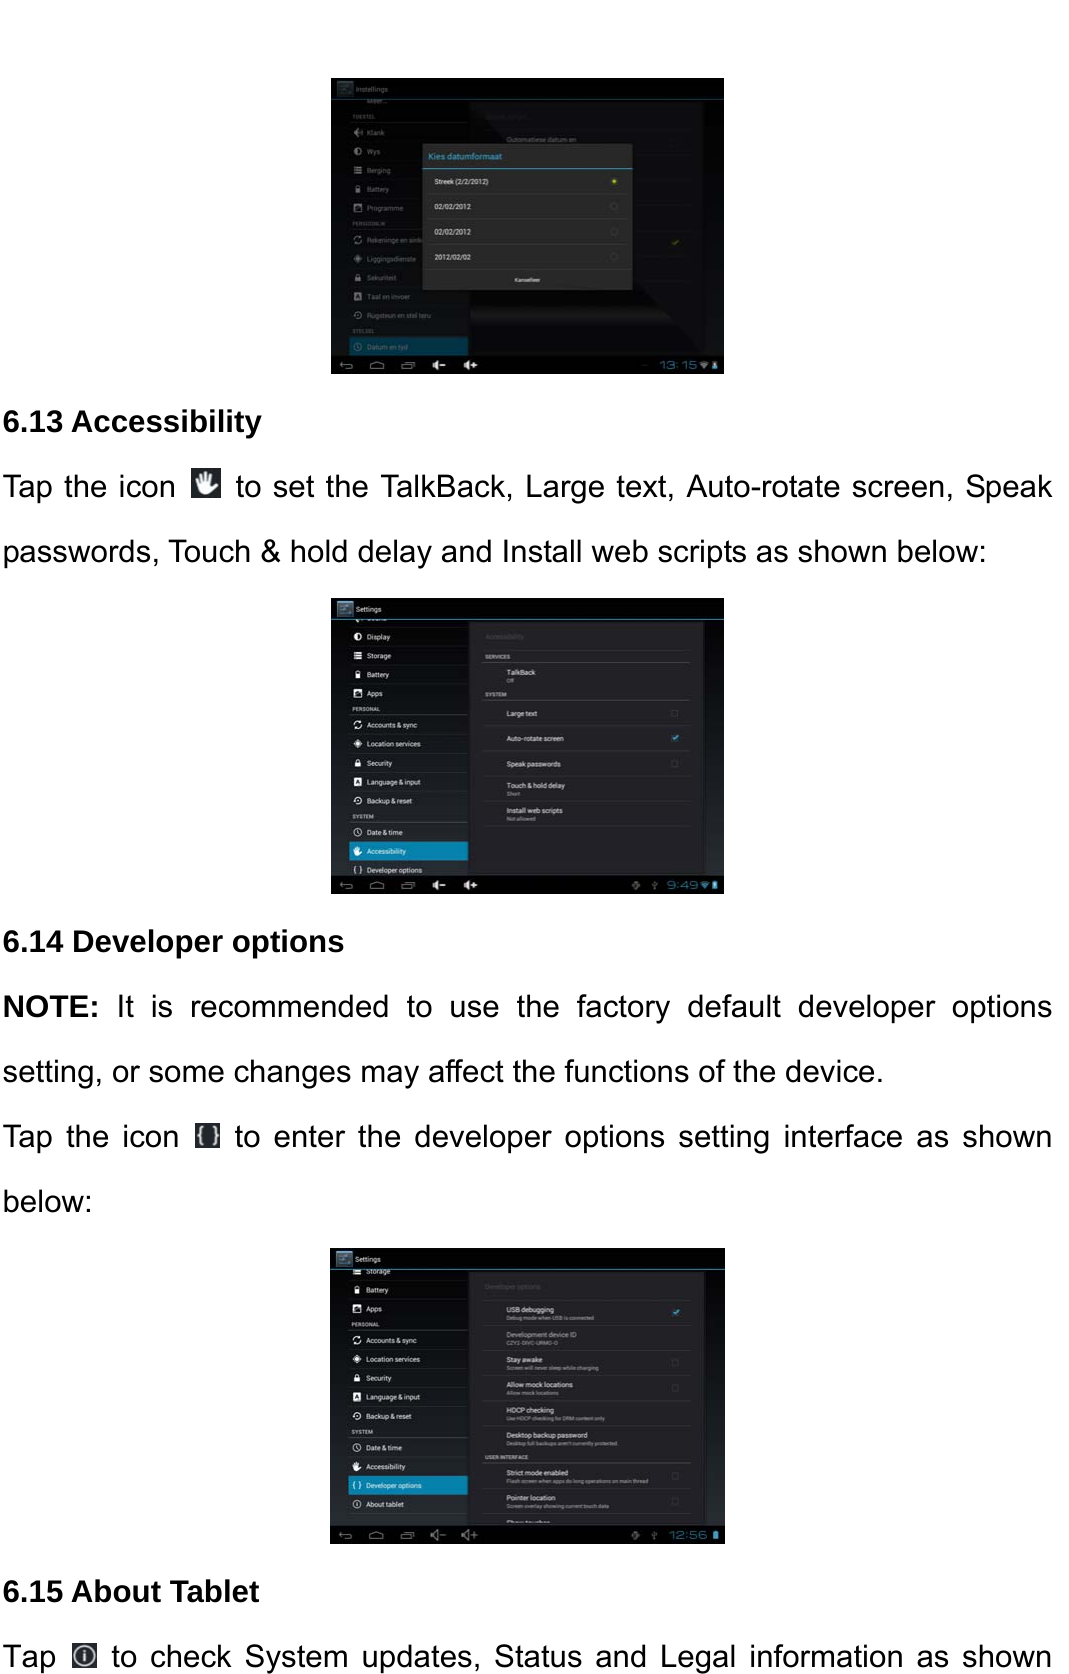     6.13 Accessibility   Tap the icon    to set the TalkBack, Large text, Auto-rotate screen, Speak passwords, Touch &amp; hold delay and Install web scripts as shown below:    6.14 Developer options   NOTE:  It is recommended to use the factory default developer options setting, or some changes may affect the functions of the device.   Tap the icon   to enter the developer options setting interface as shown below:   6.15 About Tablet Tap   to check System updates, Status and Legal information as shown 